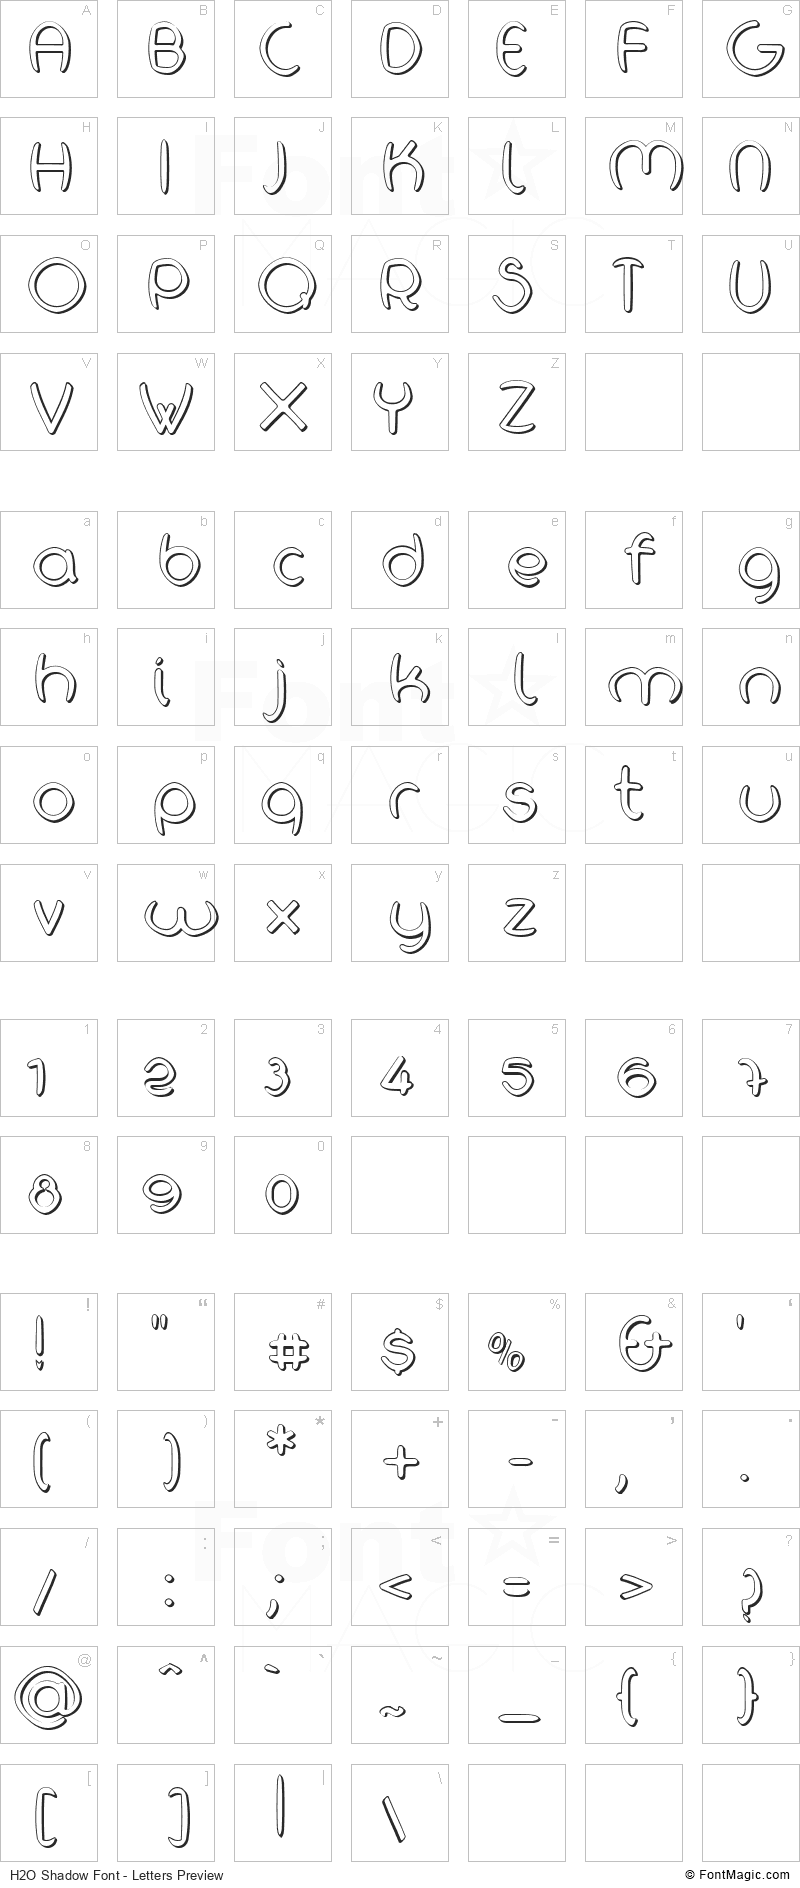 H2O Shadow Font - All Latters Preview Chart